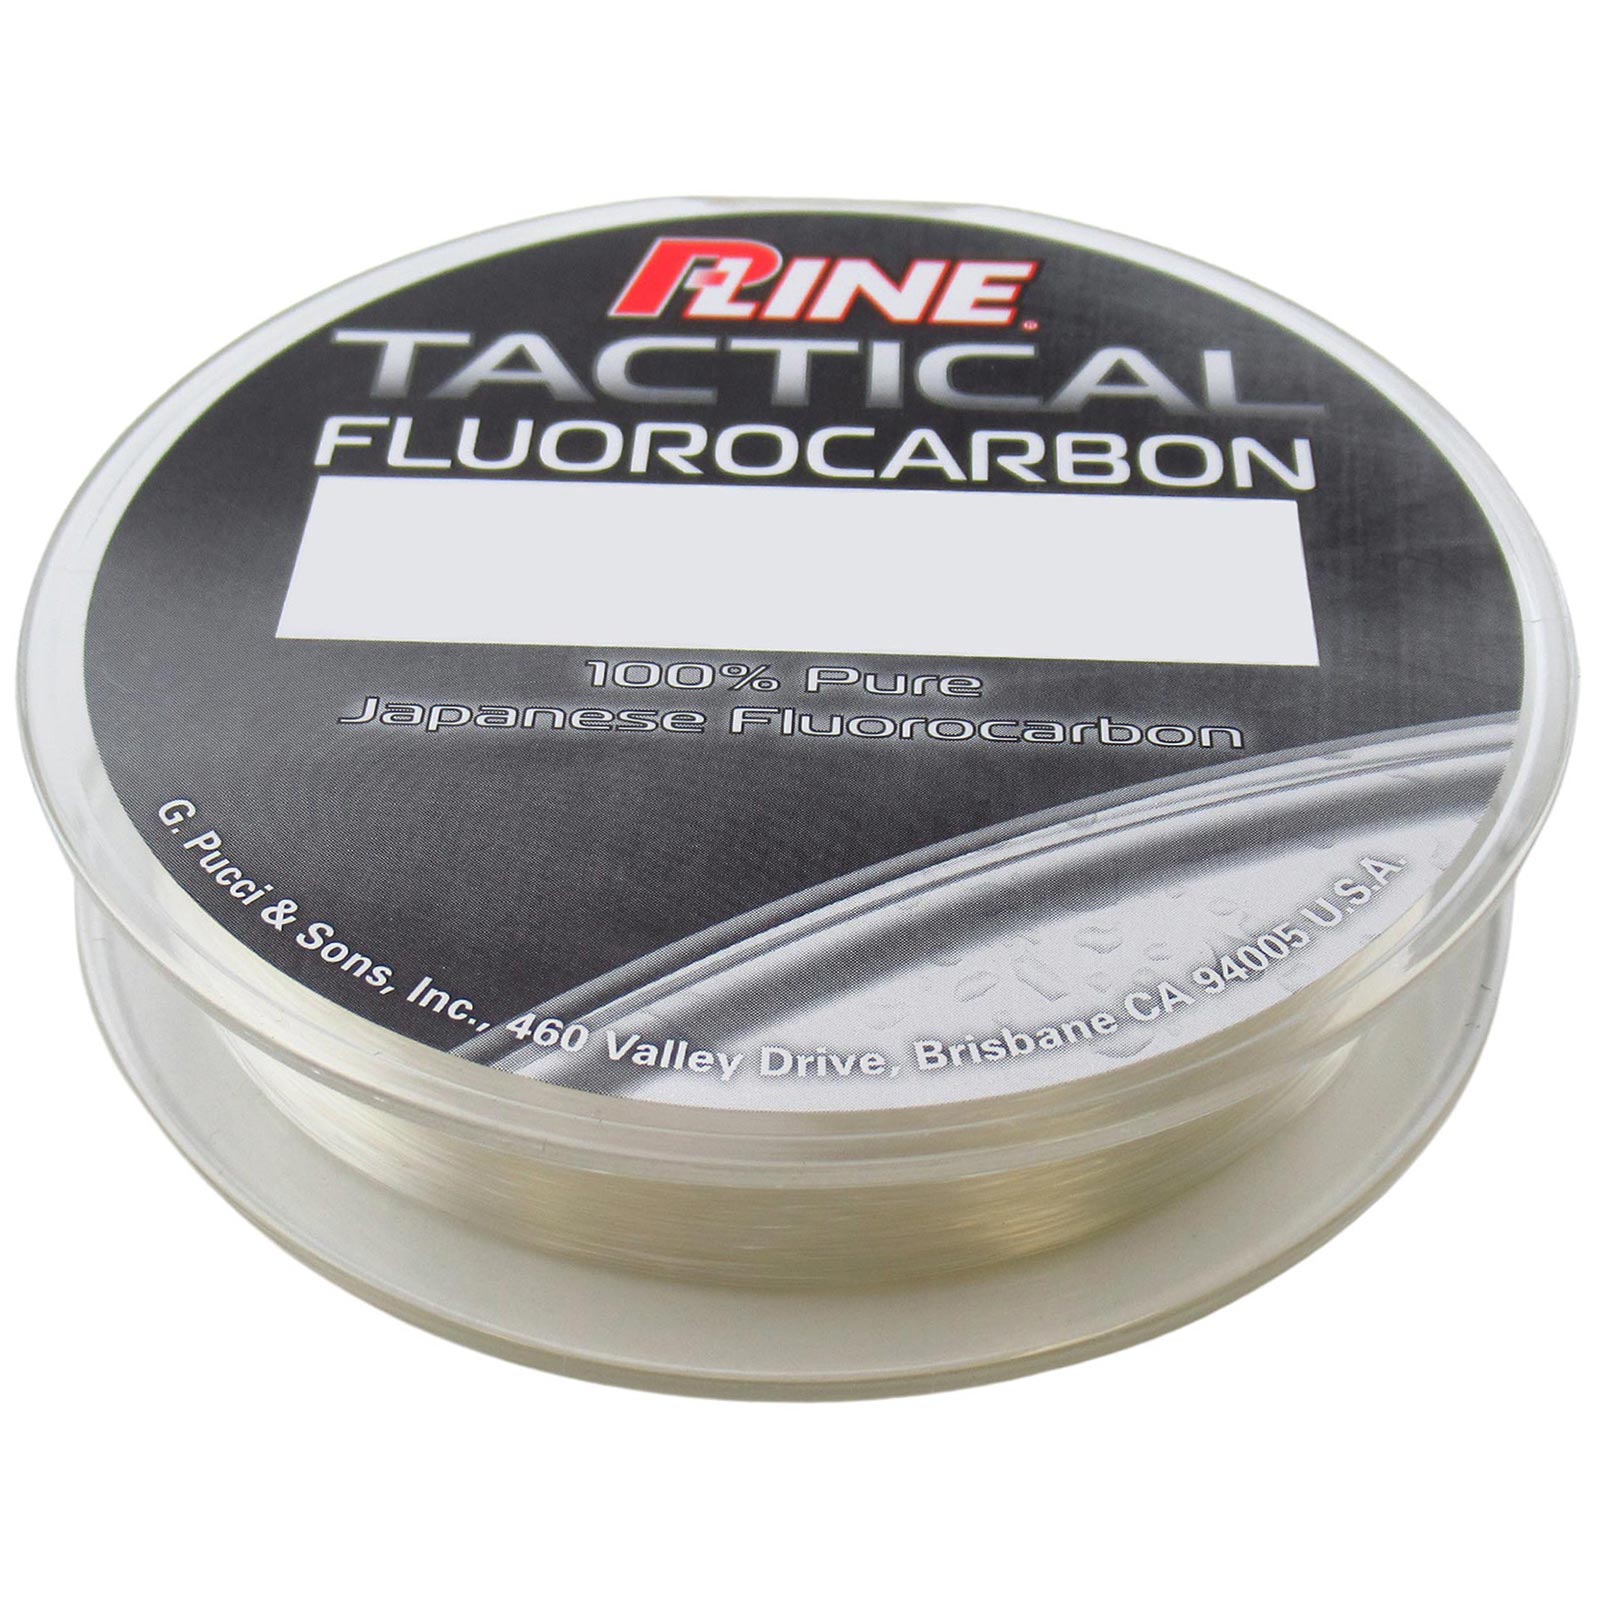 Discount P-line Tactical Fluorocarbon 20 lbs 200 Yard for Sale